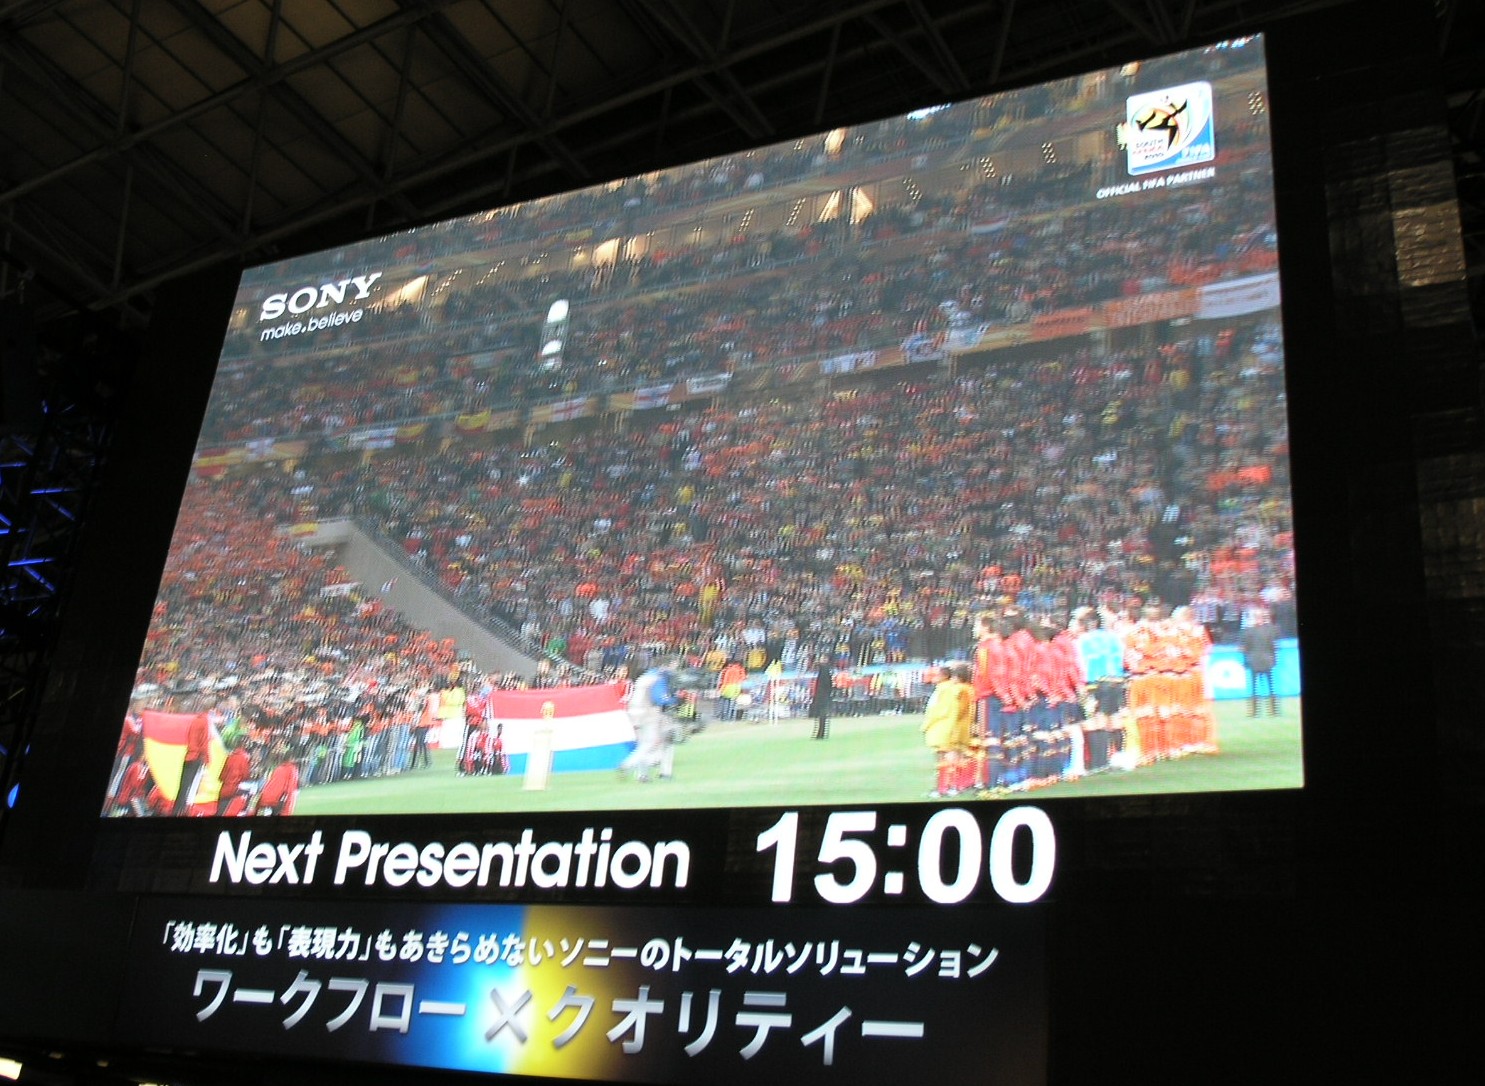 Large 3D LED display (Sony).